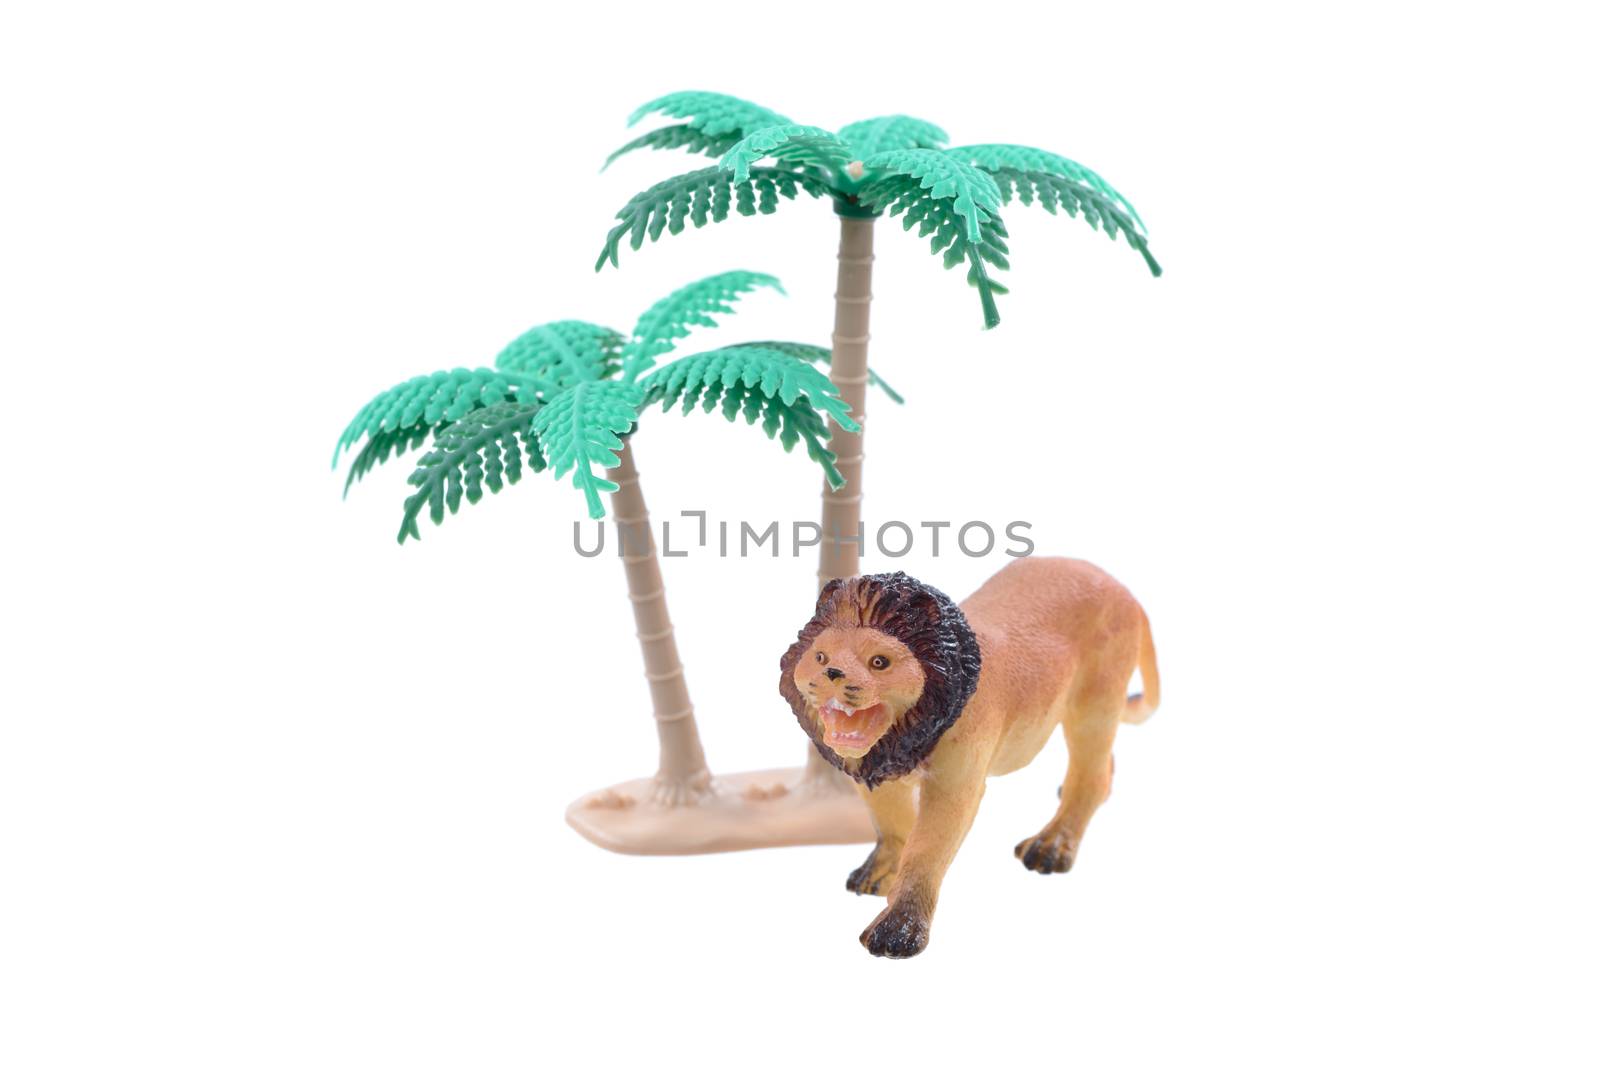 A small toy lion with trees ioslated on a white background.